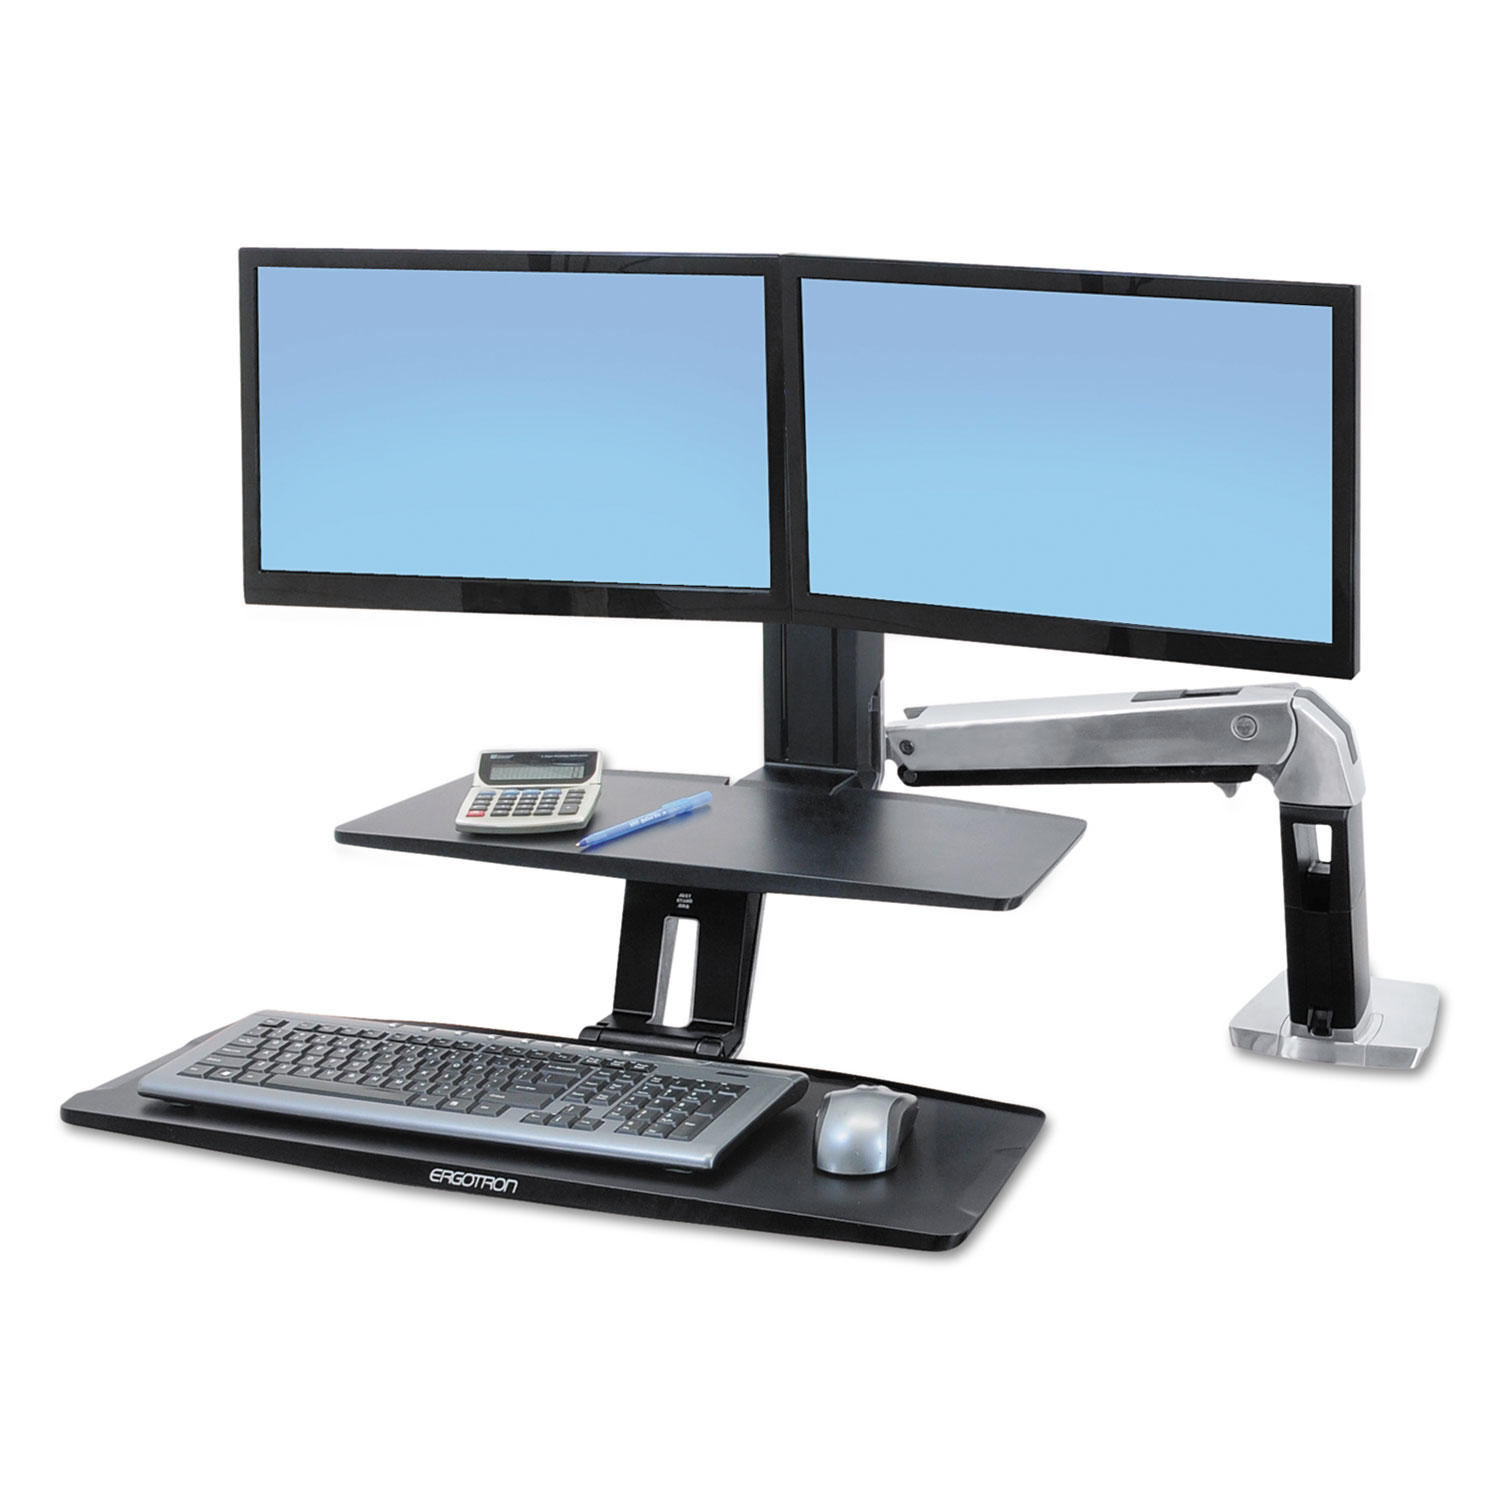  WorkFit by Ergotron 24-392-026 WorkFit-A Sit-Stand Workstation with Suspended Keyboard, Dual, 21.5w x 11d x 37h, Aluminum/Black (ERG24392026) 